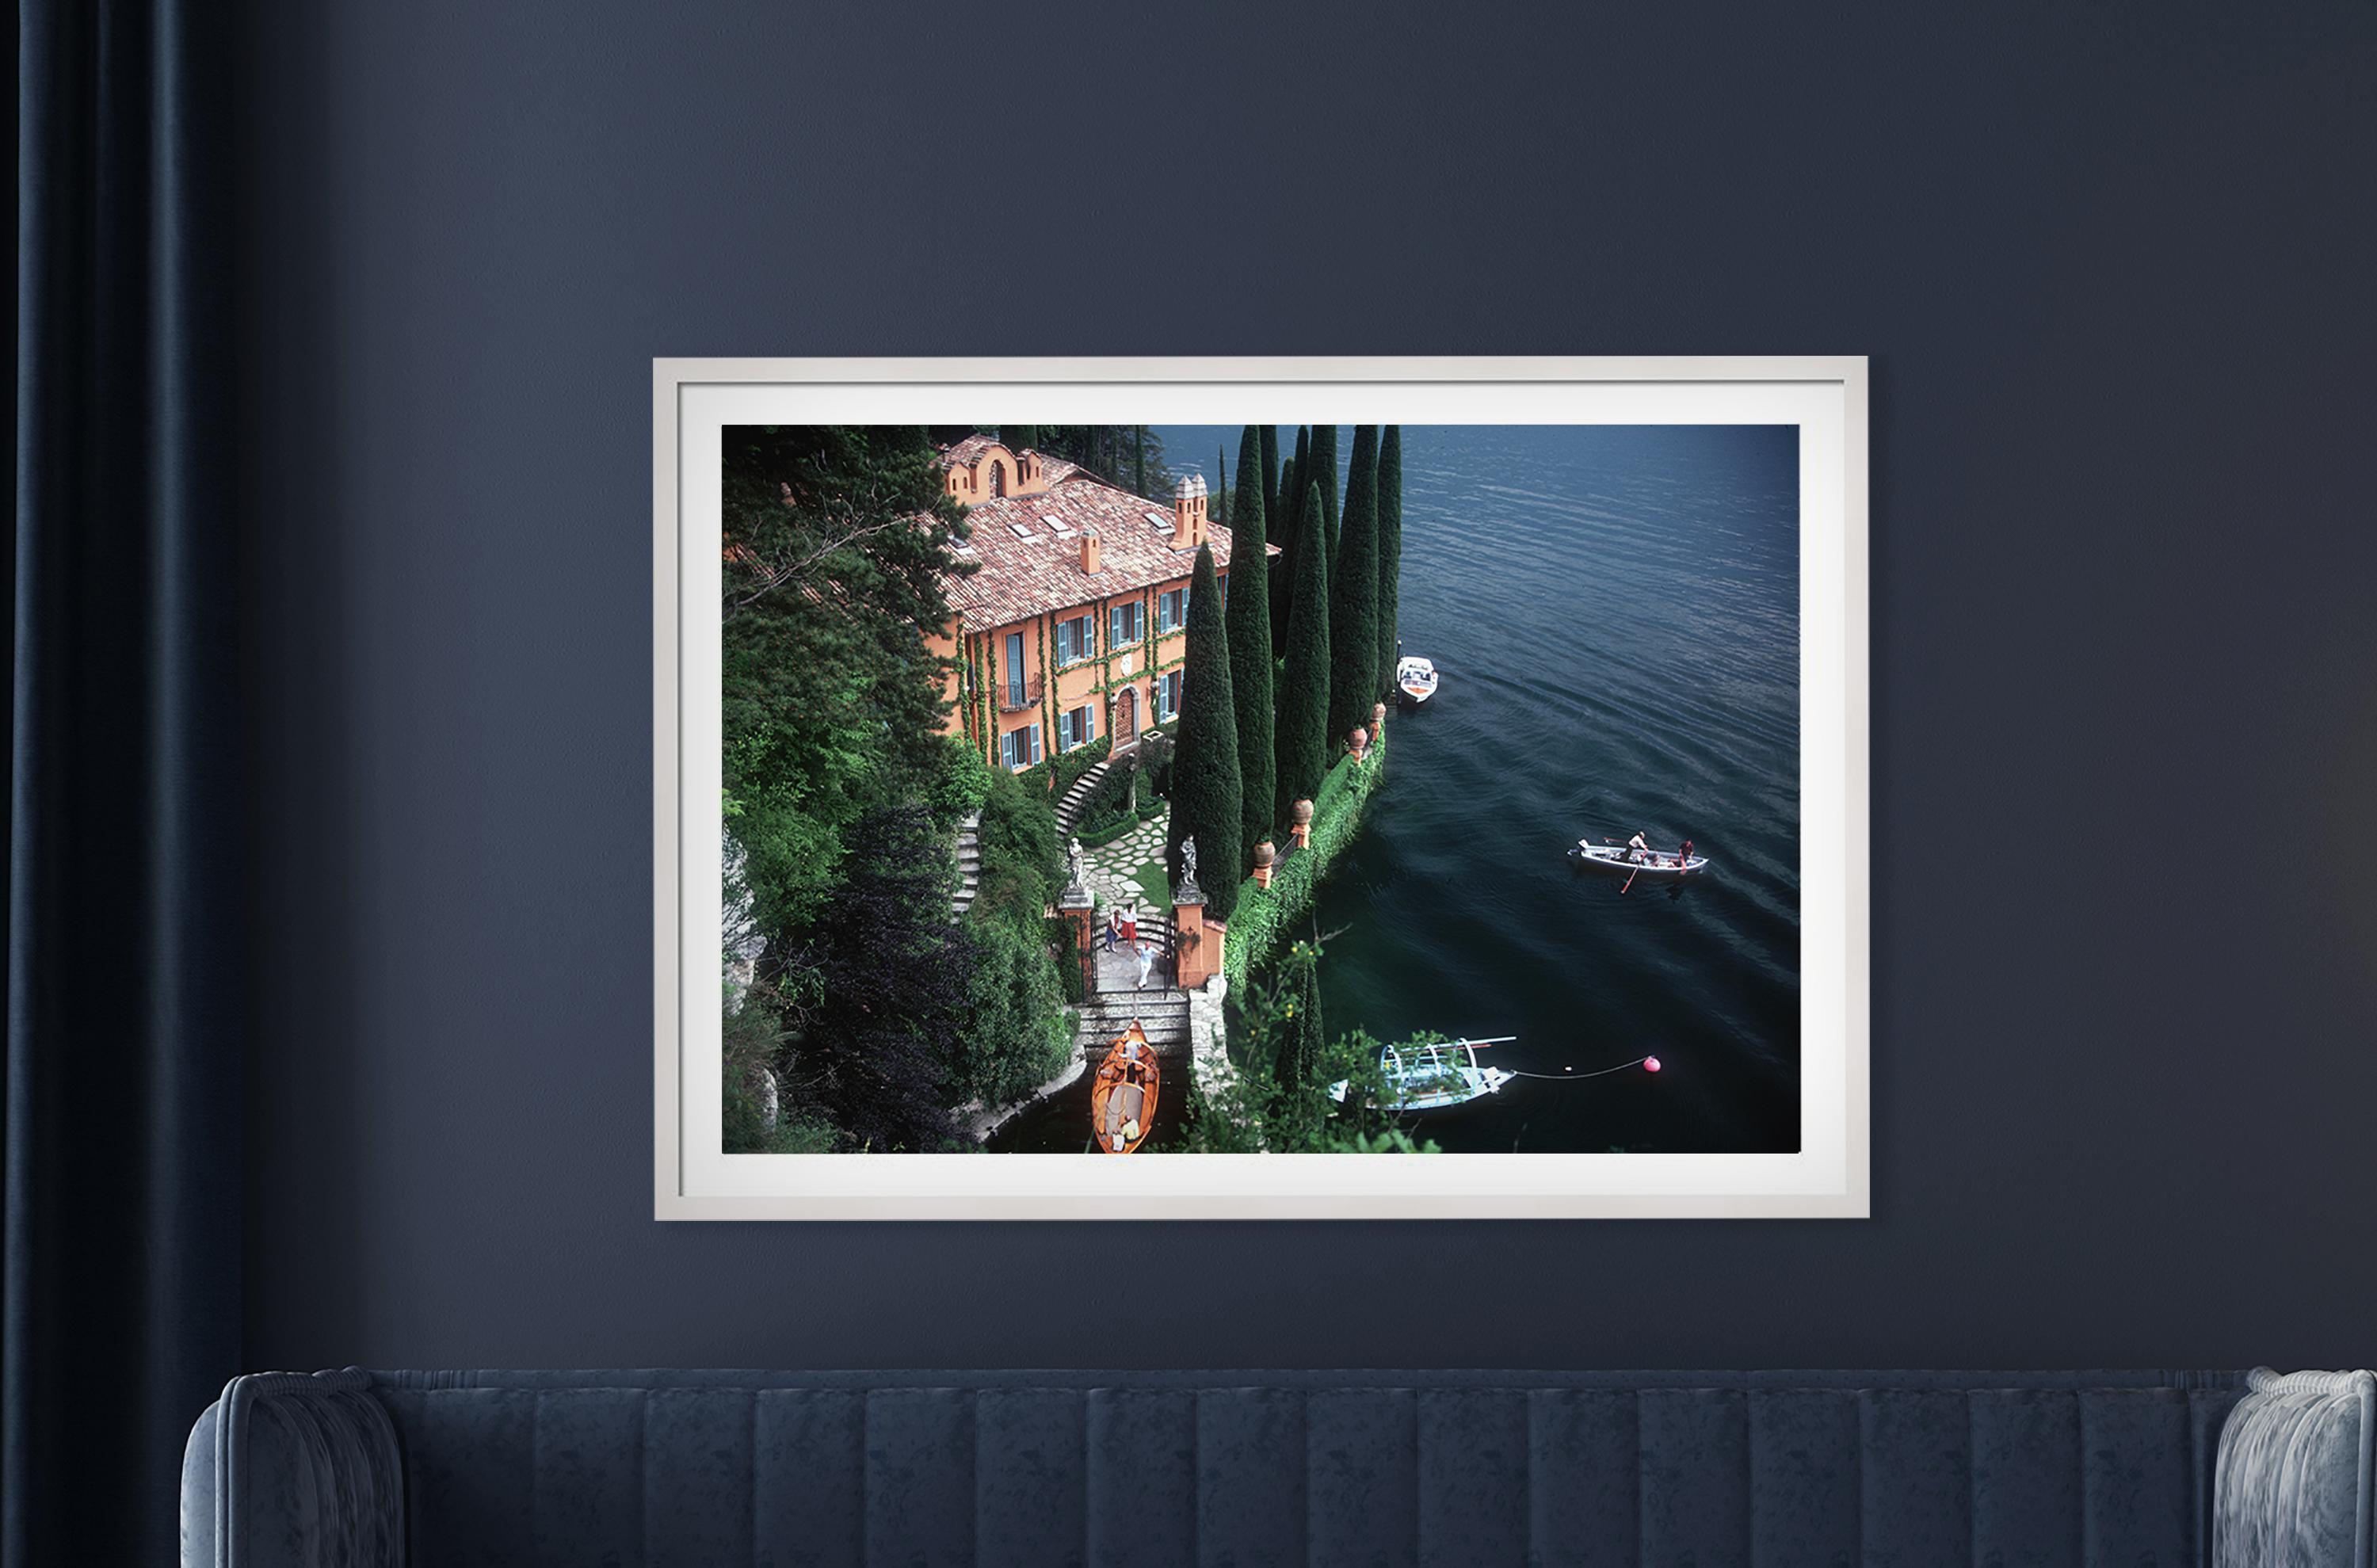 Giacomo and Stefania Mantegazza welcome guests arriving by boat at their villa, La Casinella, on Lake Como, 1983. Brilliant green trees contrast with the vivid orange, reds and turquoise of the architecture. Four boats can are afloat on the deep